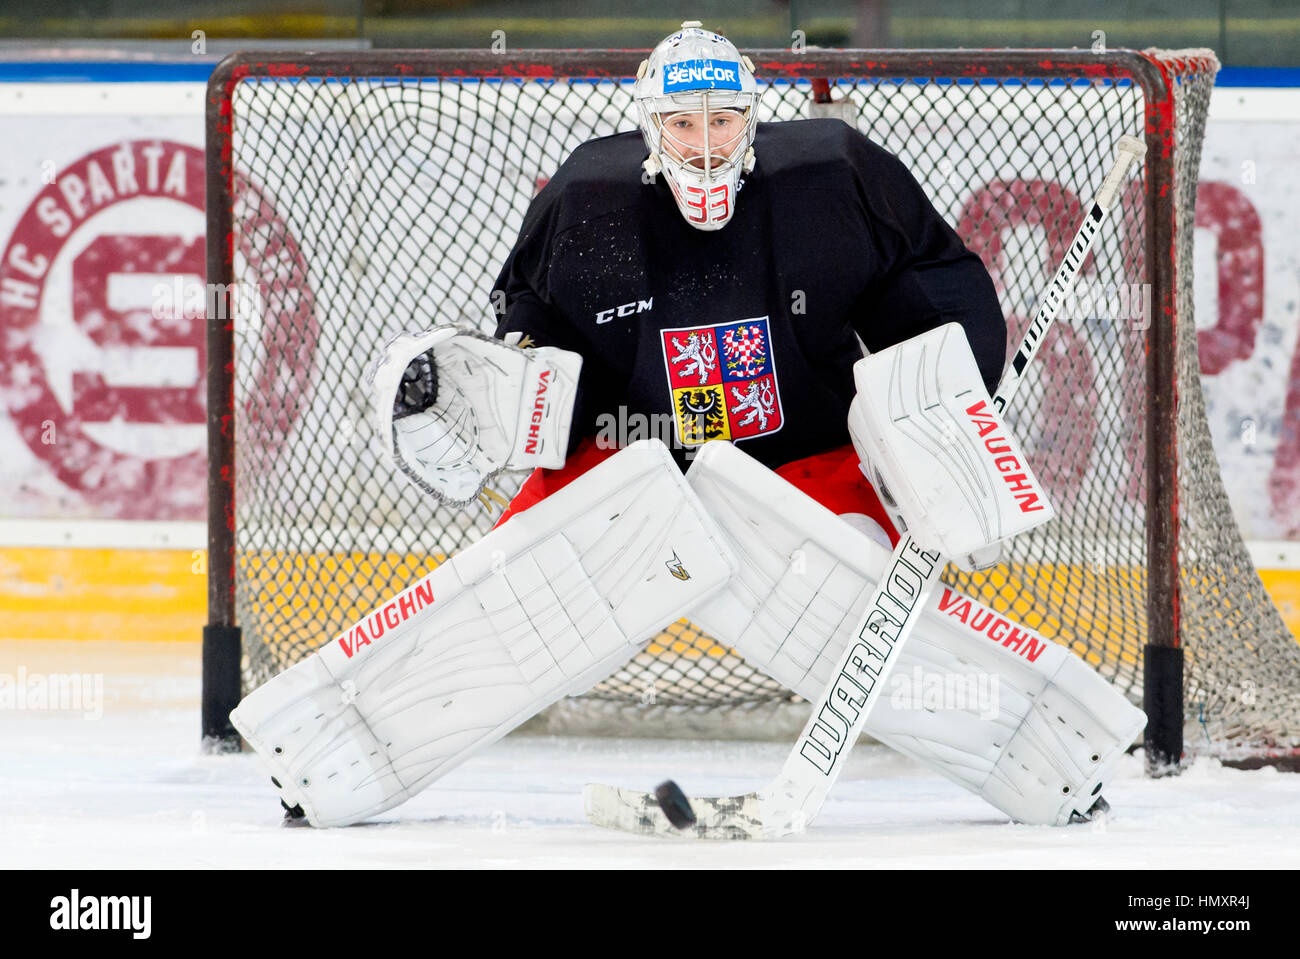 Prague, Czech Republic. 07th Feb, 2017. The Czech national ice-hockey team's player goalie Pavel Francouz in action during the training session prior to the February Sweden Games in Gothenburg in Prague, Czech Republic, February 7, 2017. Sweden Games, the third part of the European Hockey Tour (EHT) series, will take place on February 9-12. Credit: Vit Simanek/CTK Photo/Alamy Live News Stock Photo